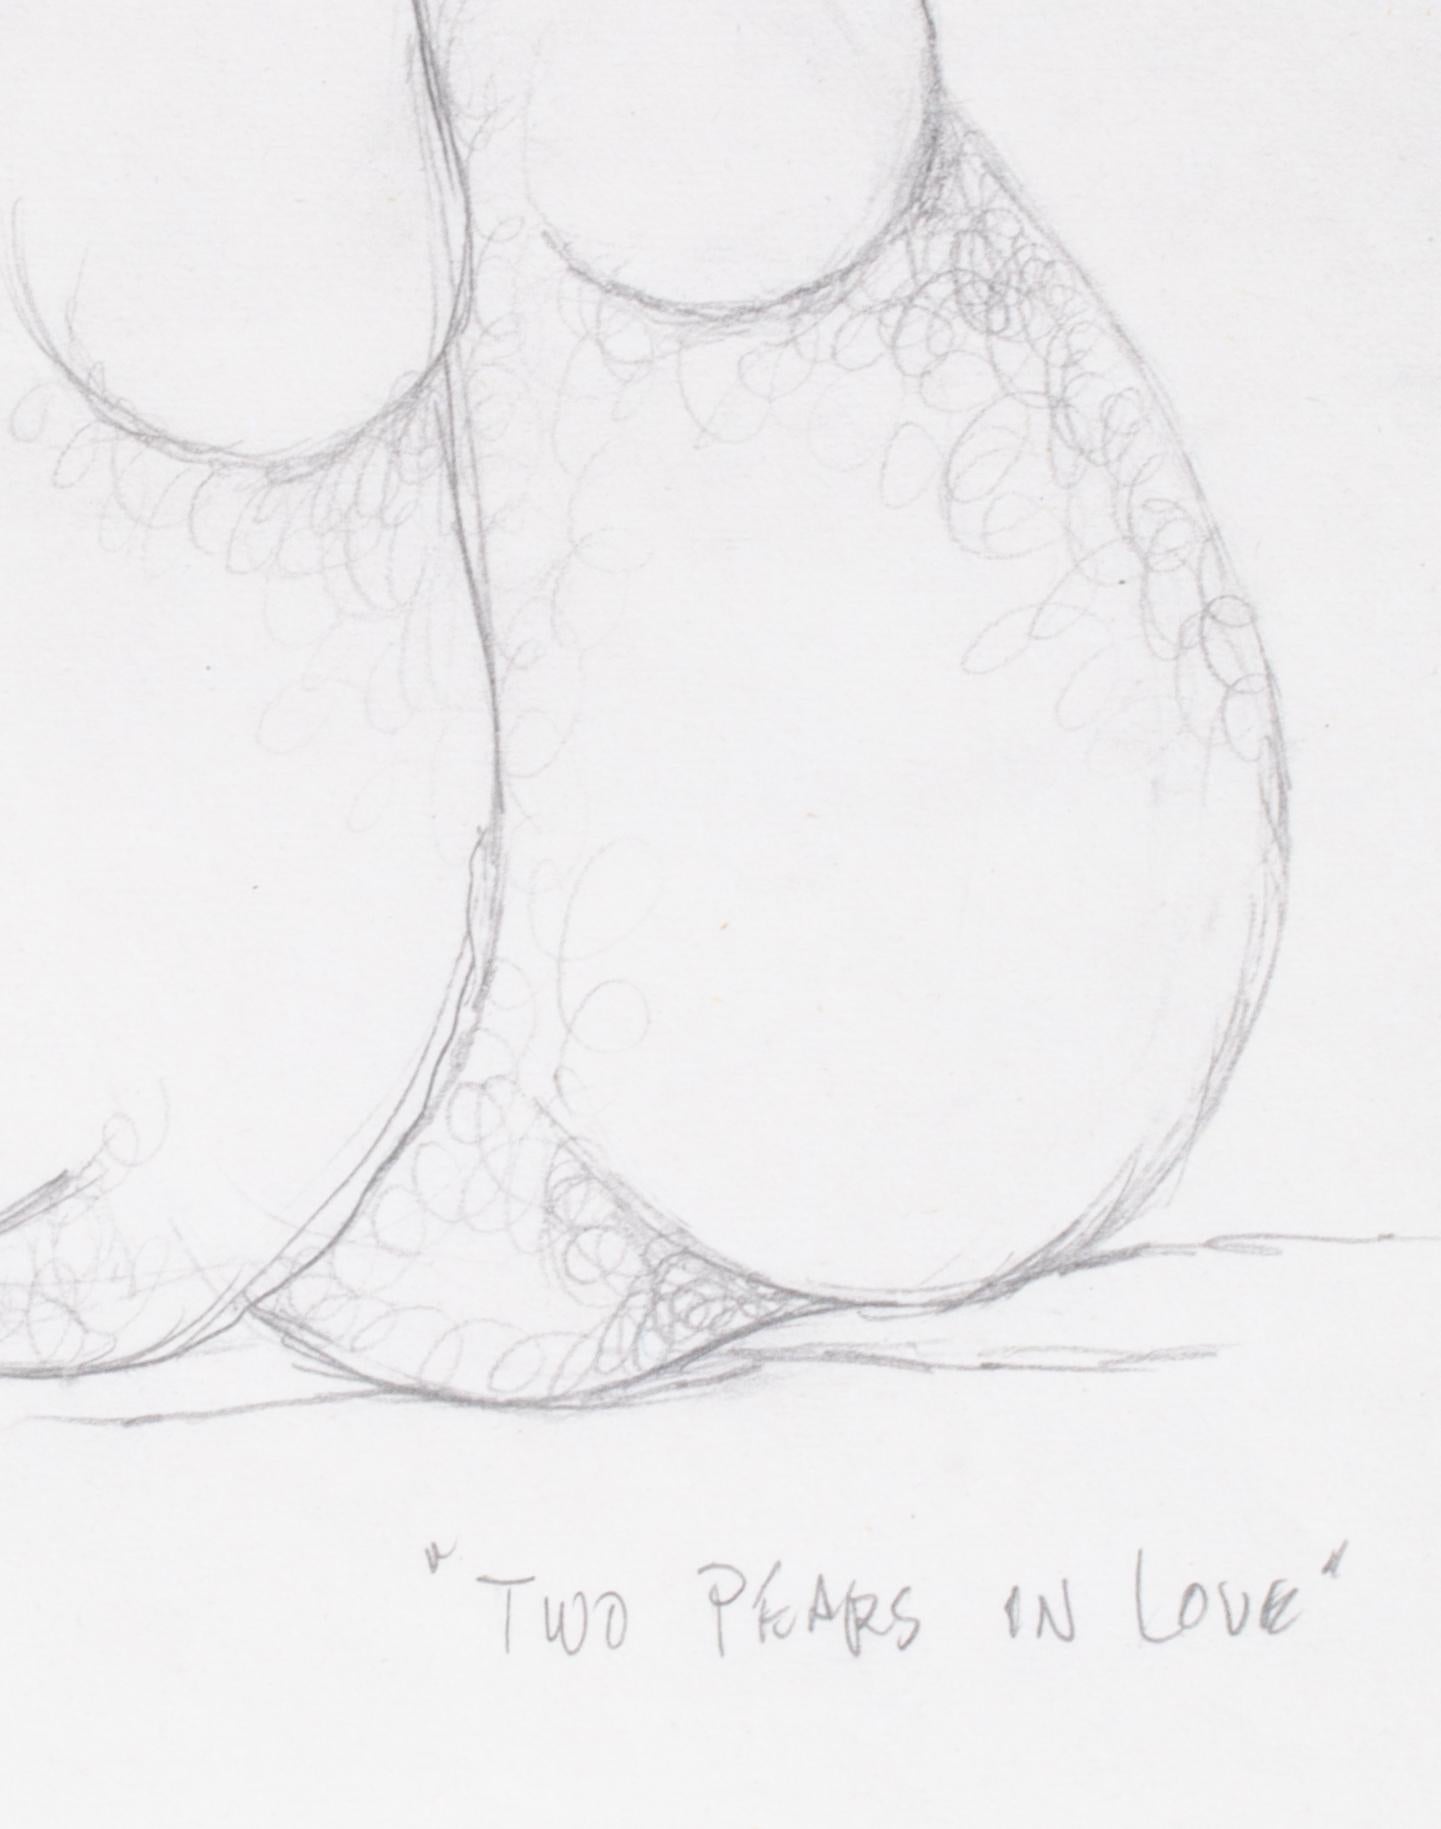 SACHA (American, b. 1965)
Two Pears in Love, 2008
Pencil on paper
20 x 16 in.
Signed lower left: Sacha 2008 NYC
Inscribed lower right: 